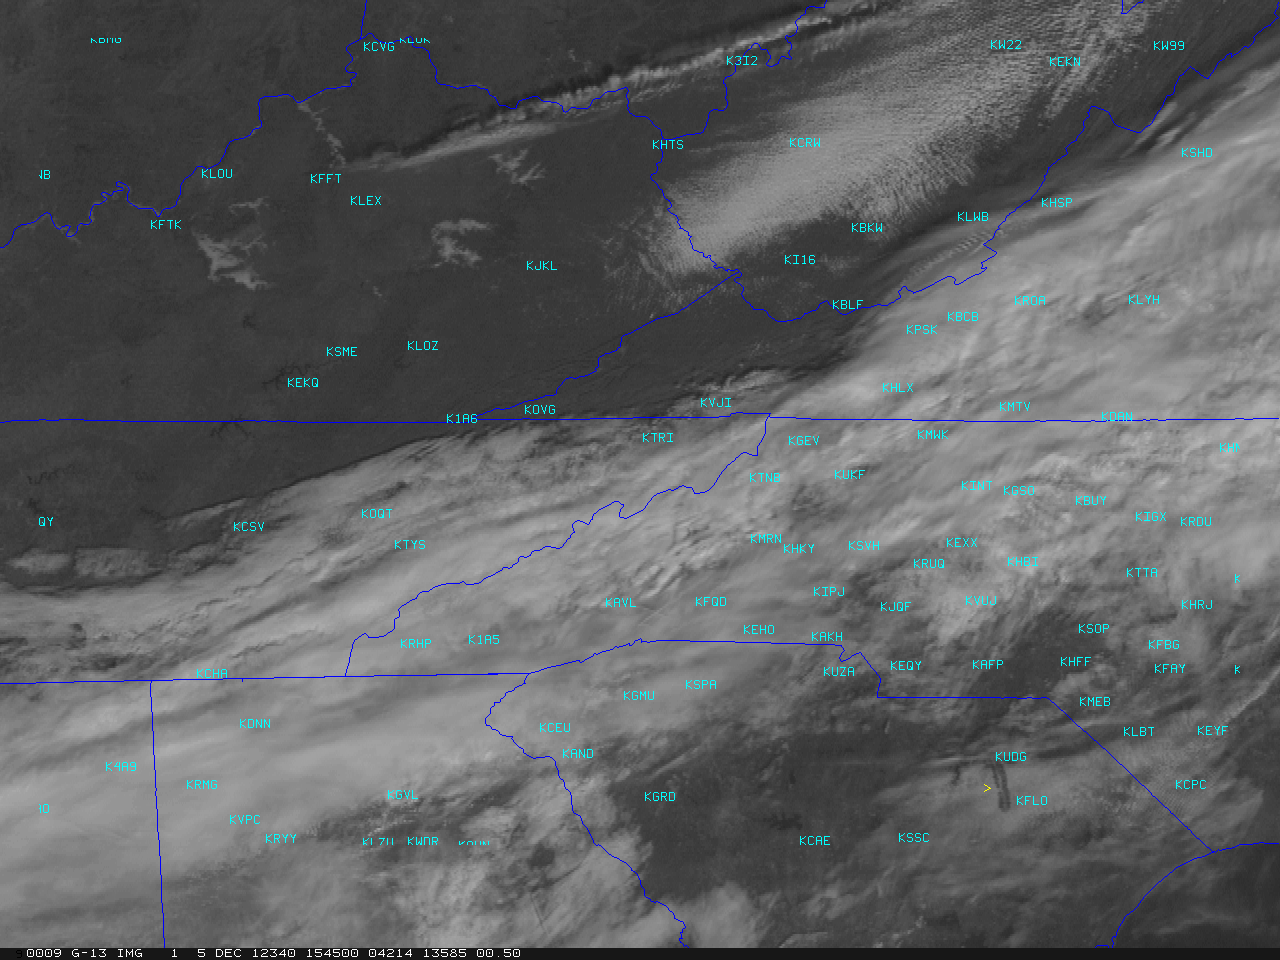 GOES-13 0.63 µm visible channel images (click image to play animation)